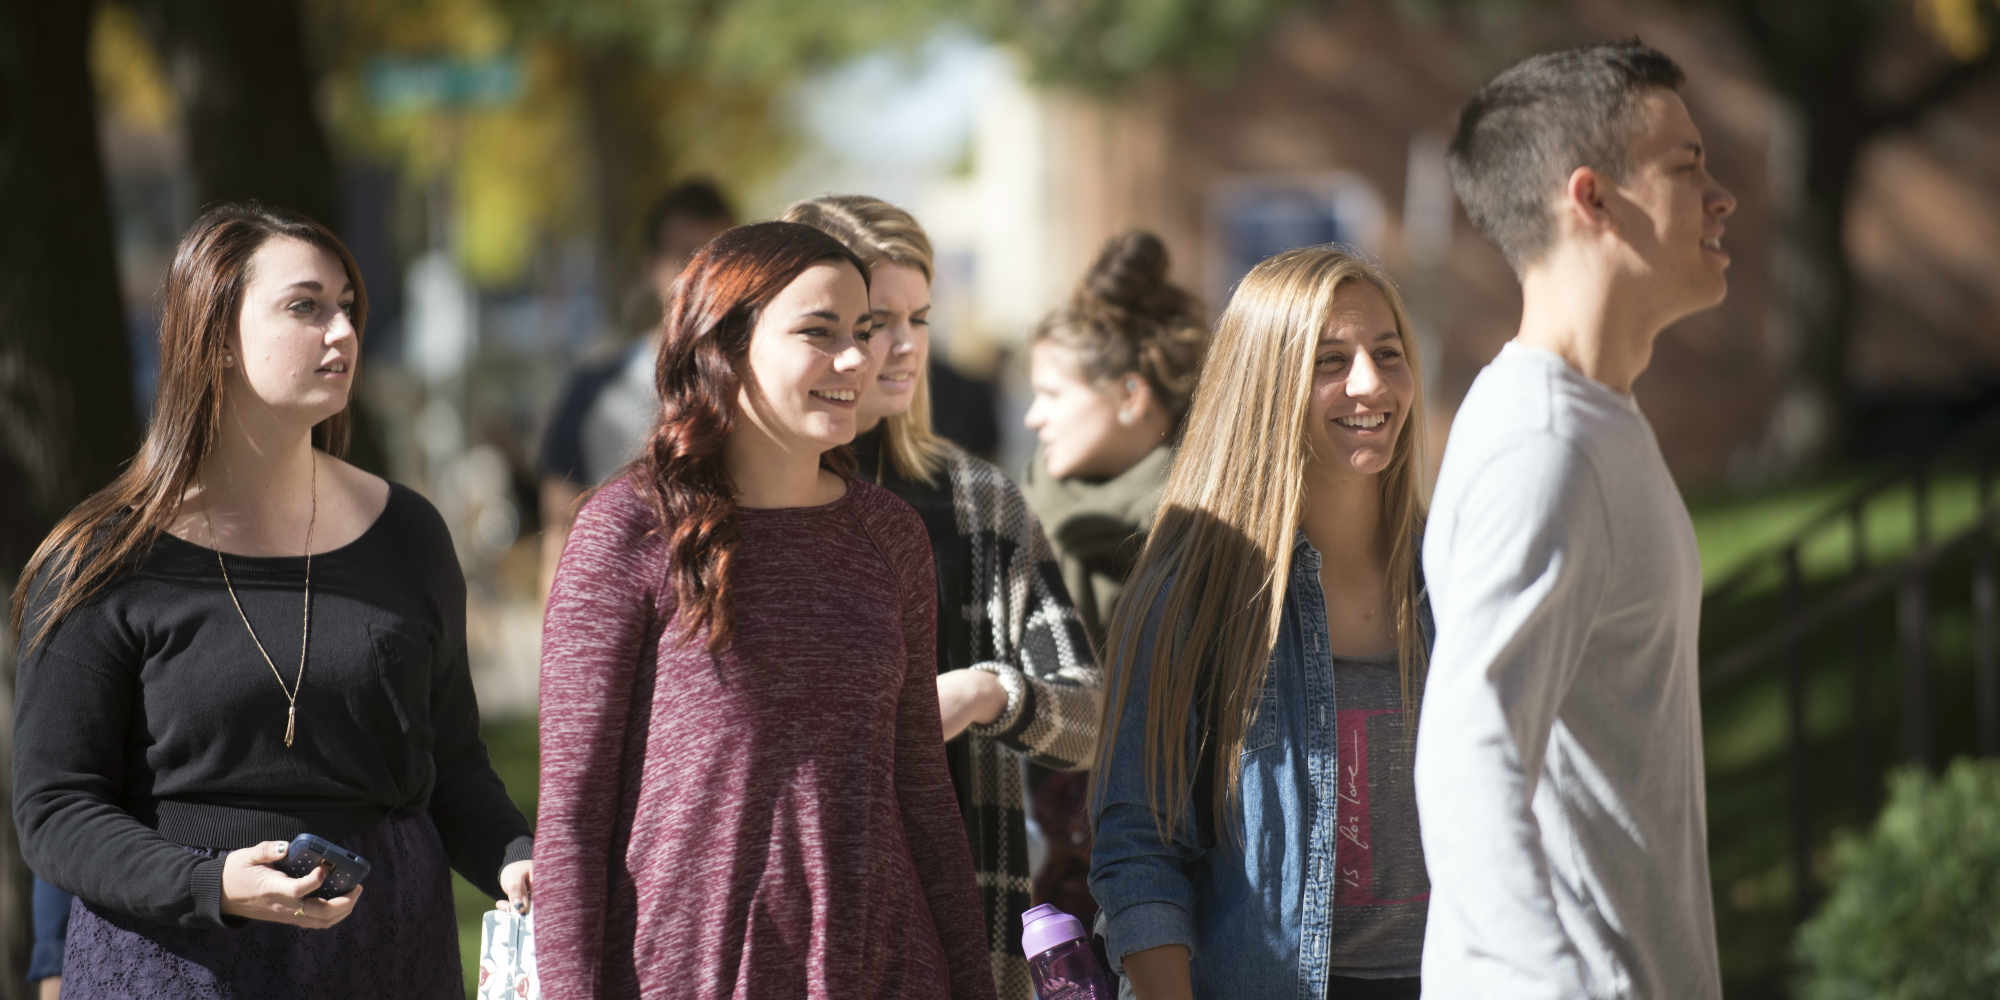 Students on North Central University's campus.